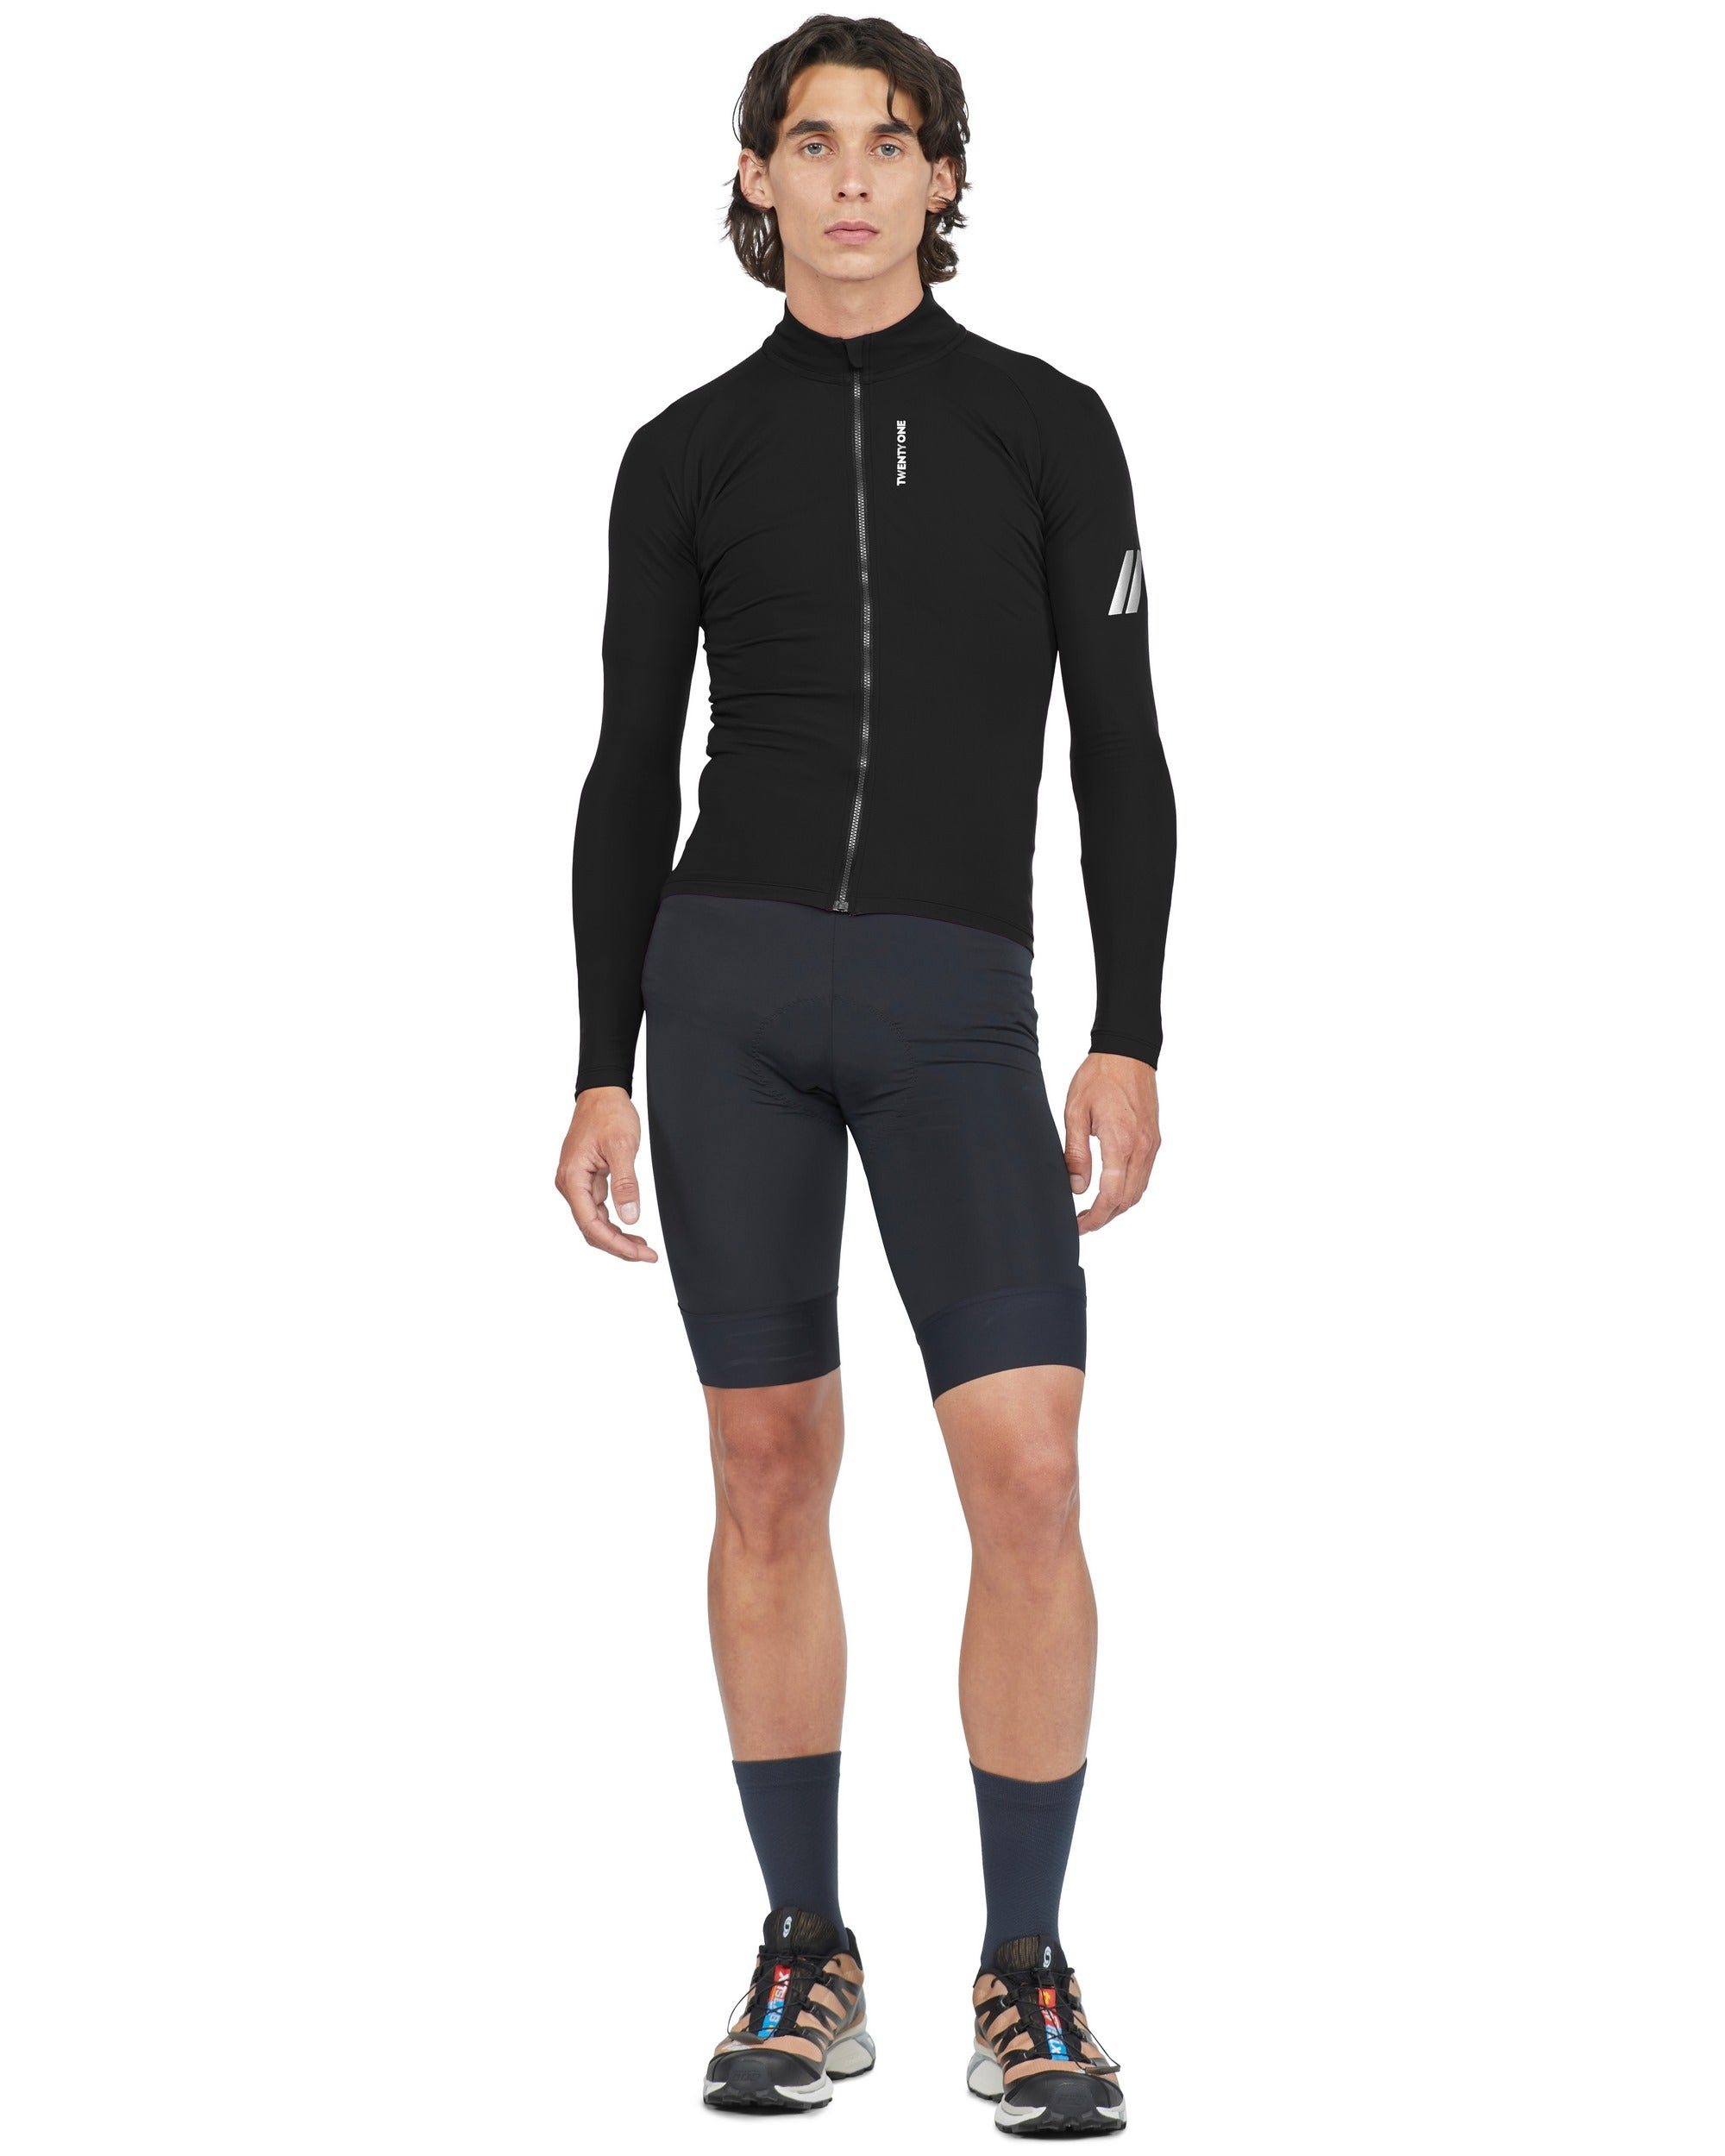 Factory Super Thermal Long Sleeve Jersey